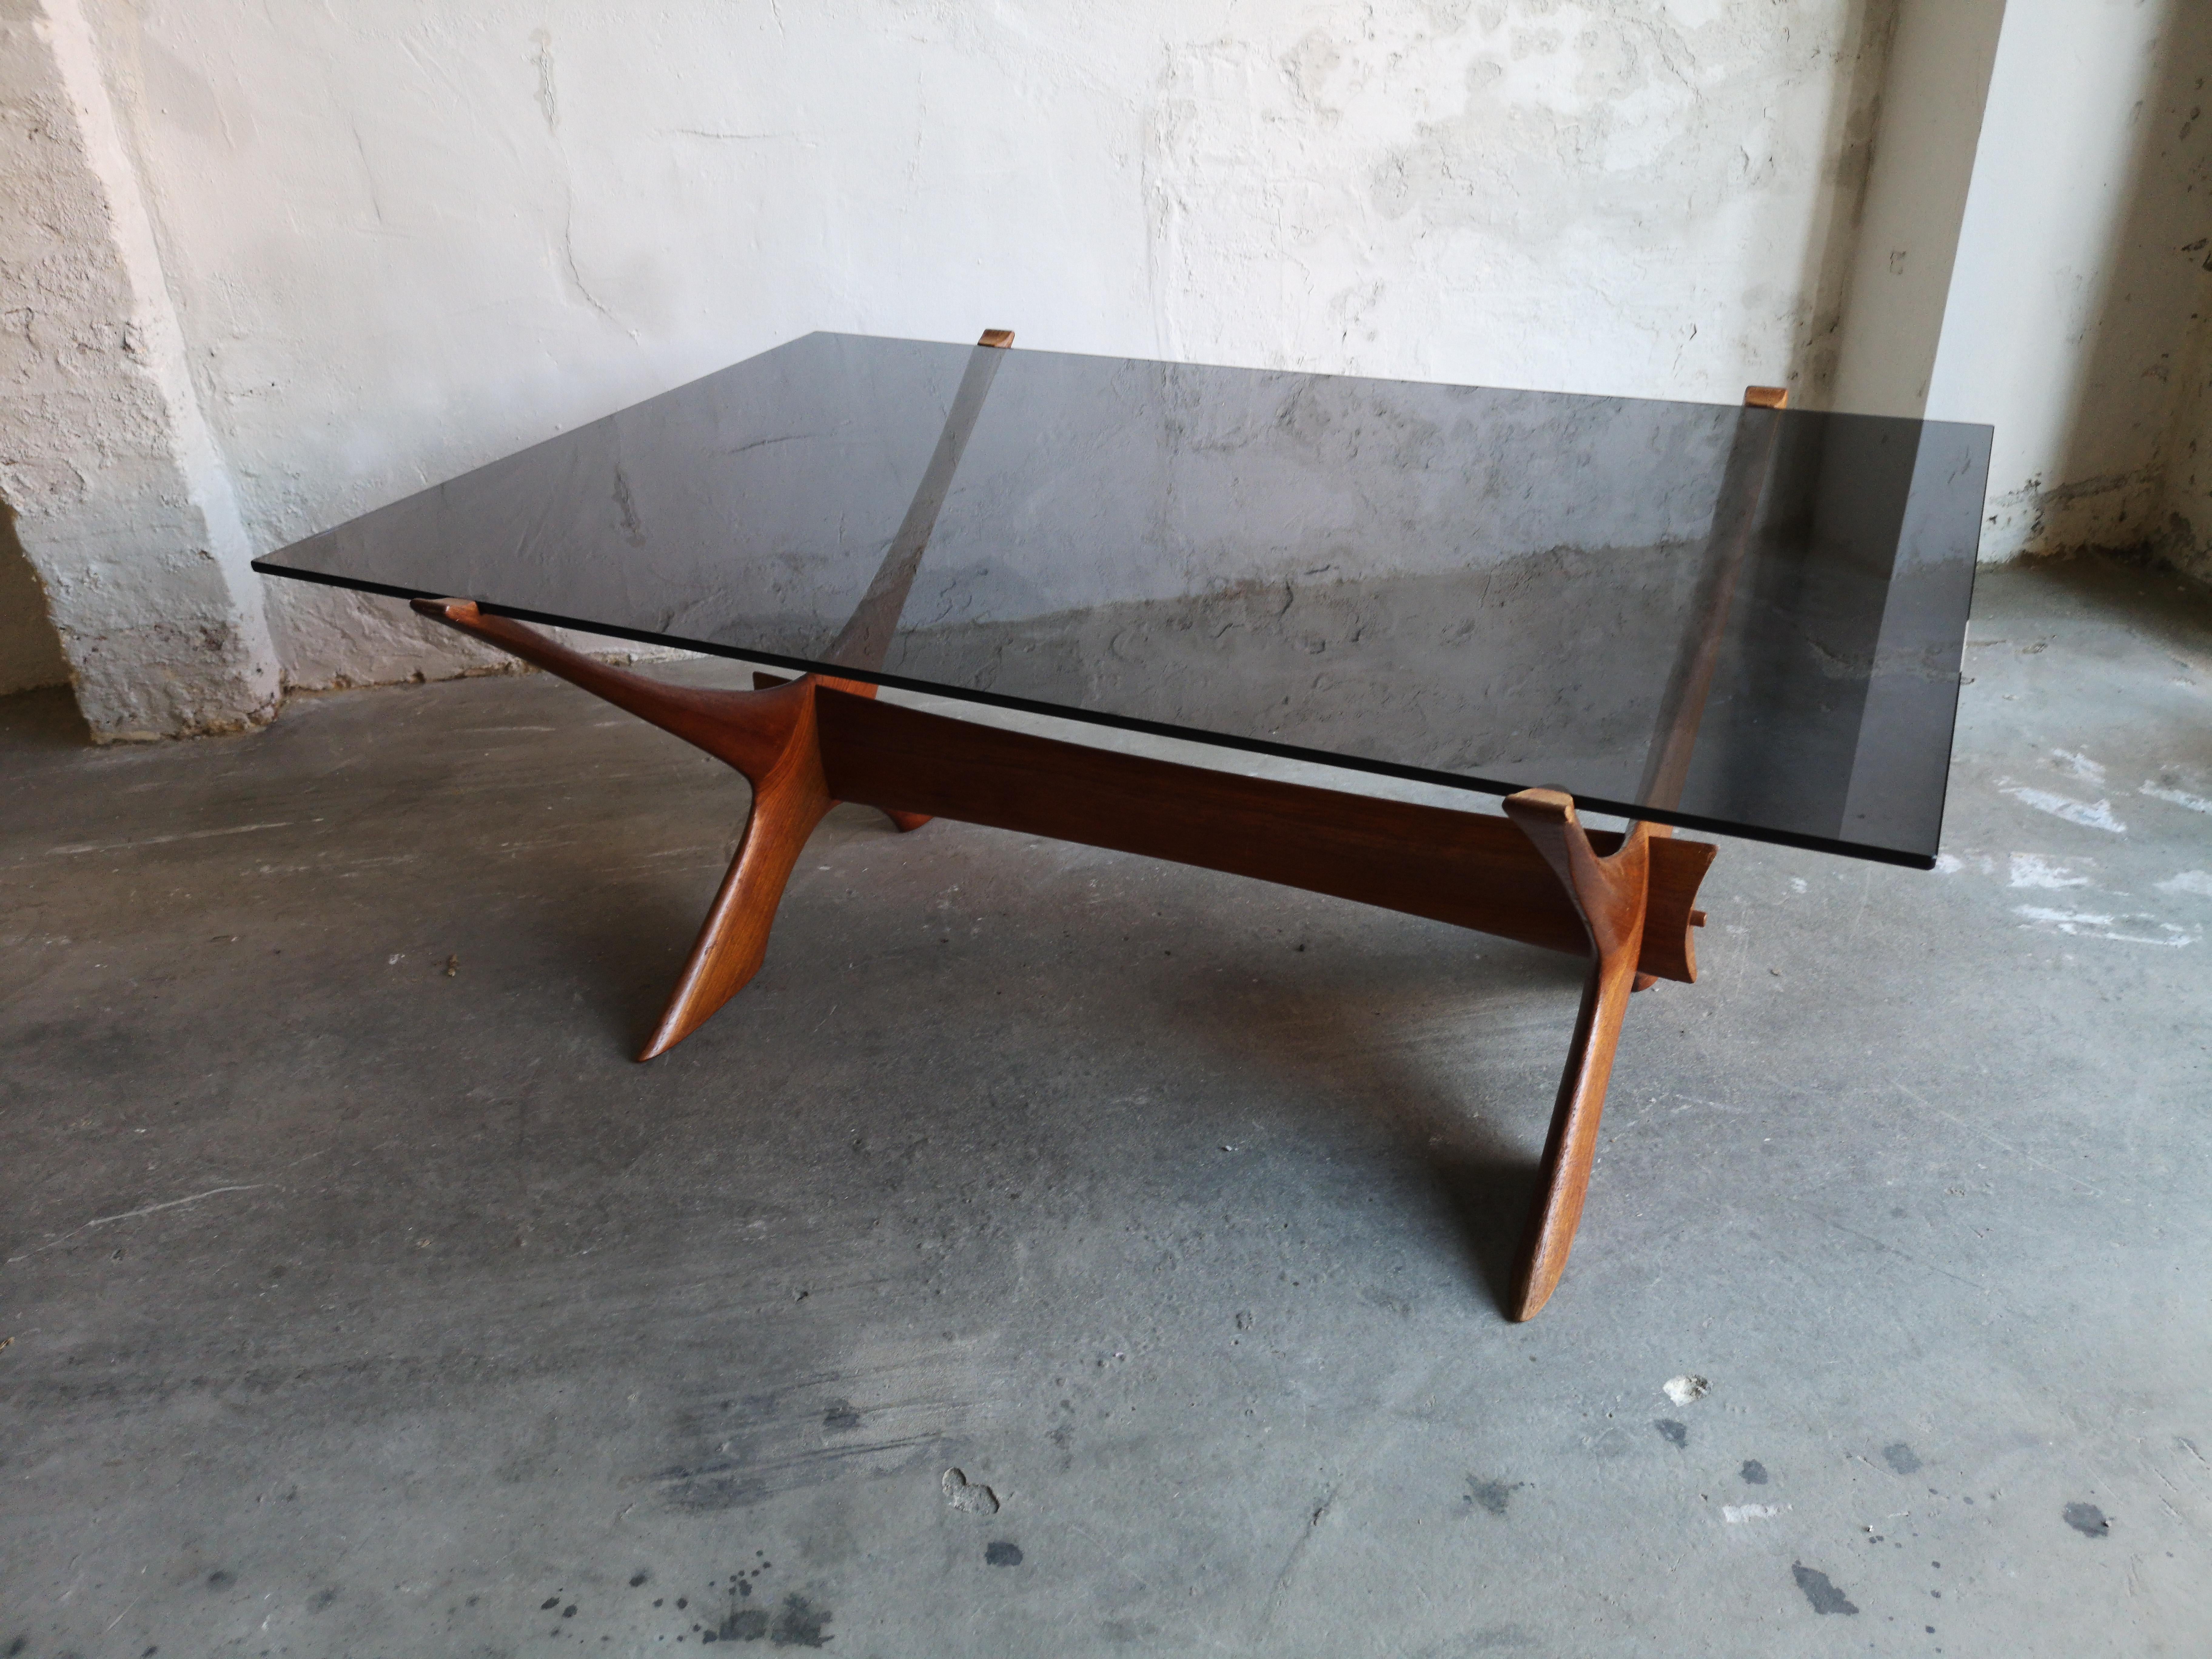 This stunning teak and glass coffee table was Designed by Fredrik Schriever-Abeln for O¨rebro Glasfabrik in Sweden in the 1960's. The teak frame is in very good vintage condition with some signs of use as expected for a 50 year old table. 

The